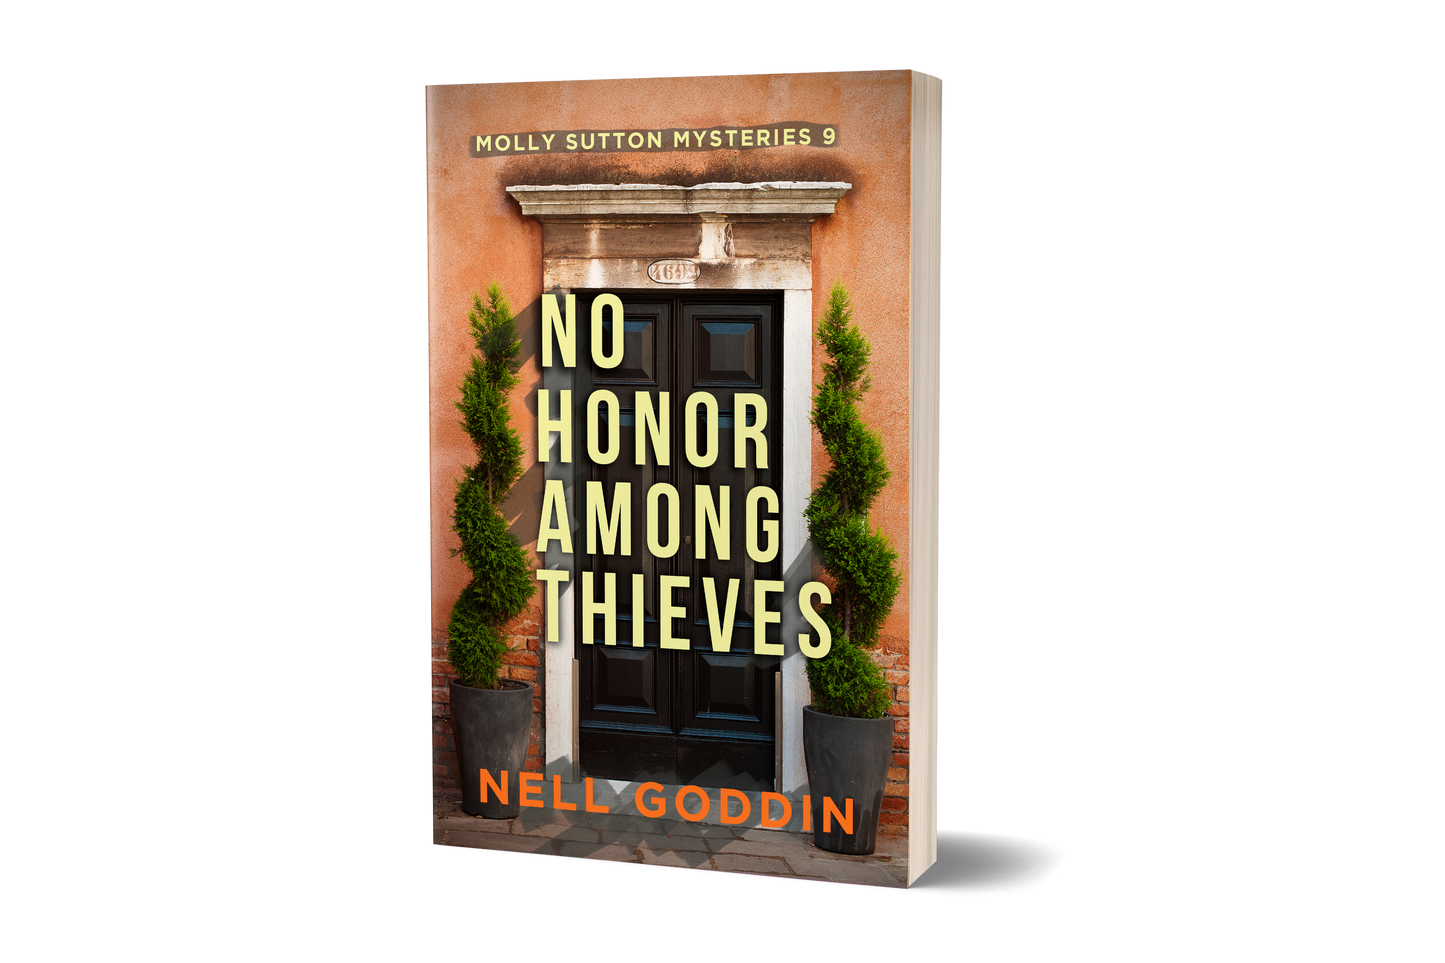 No Honor Among Thieves (Molly Sutton Mysteries 9): paperback